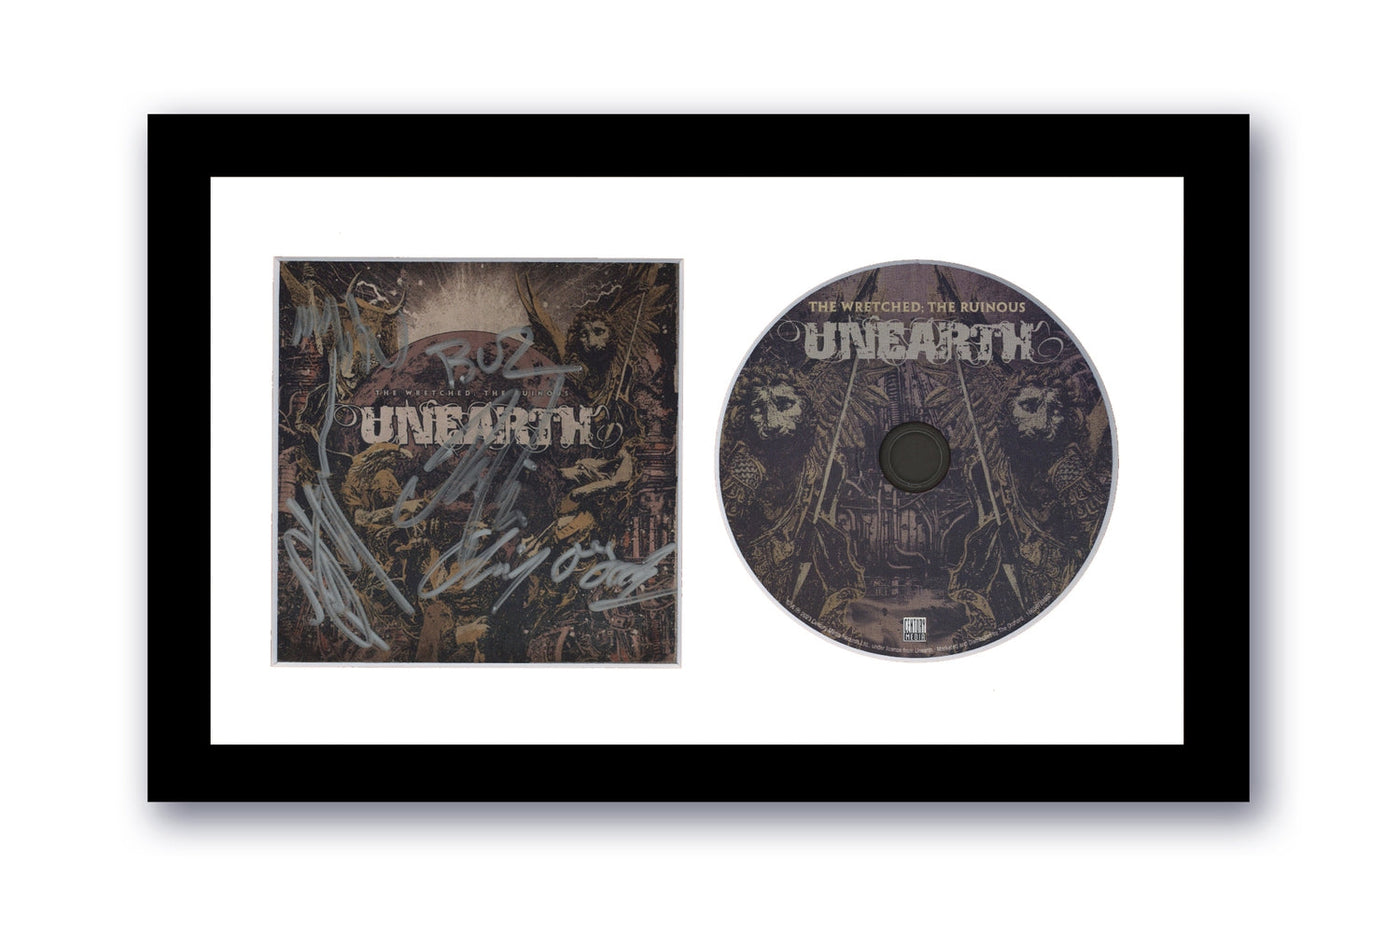 Unearth Signed 7x12 Custom Framed CD The Wretched The Ruinous Autographed ACOA